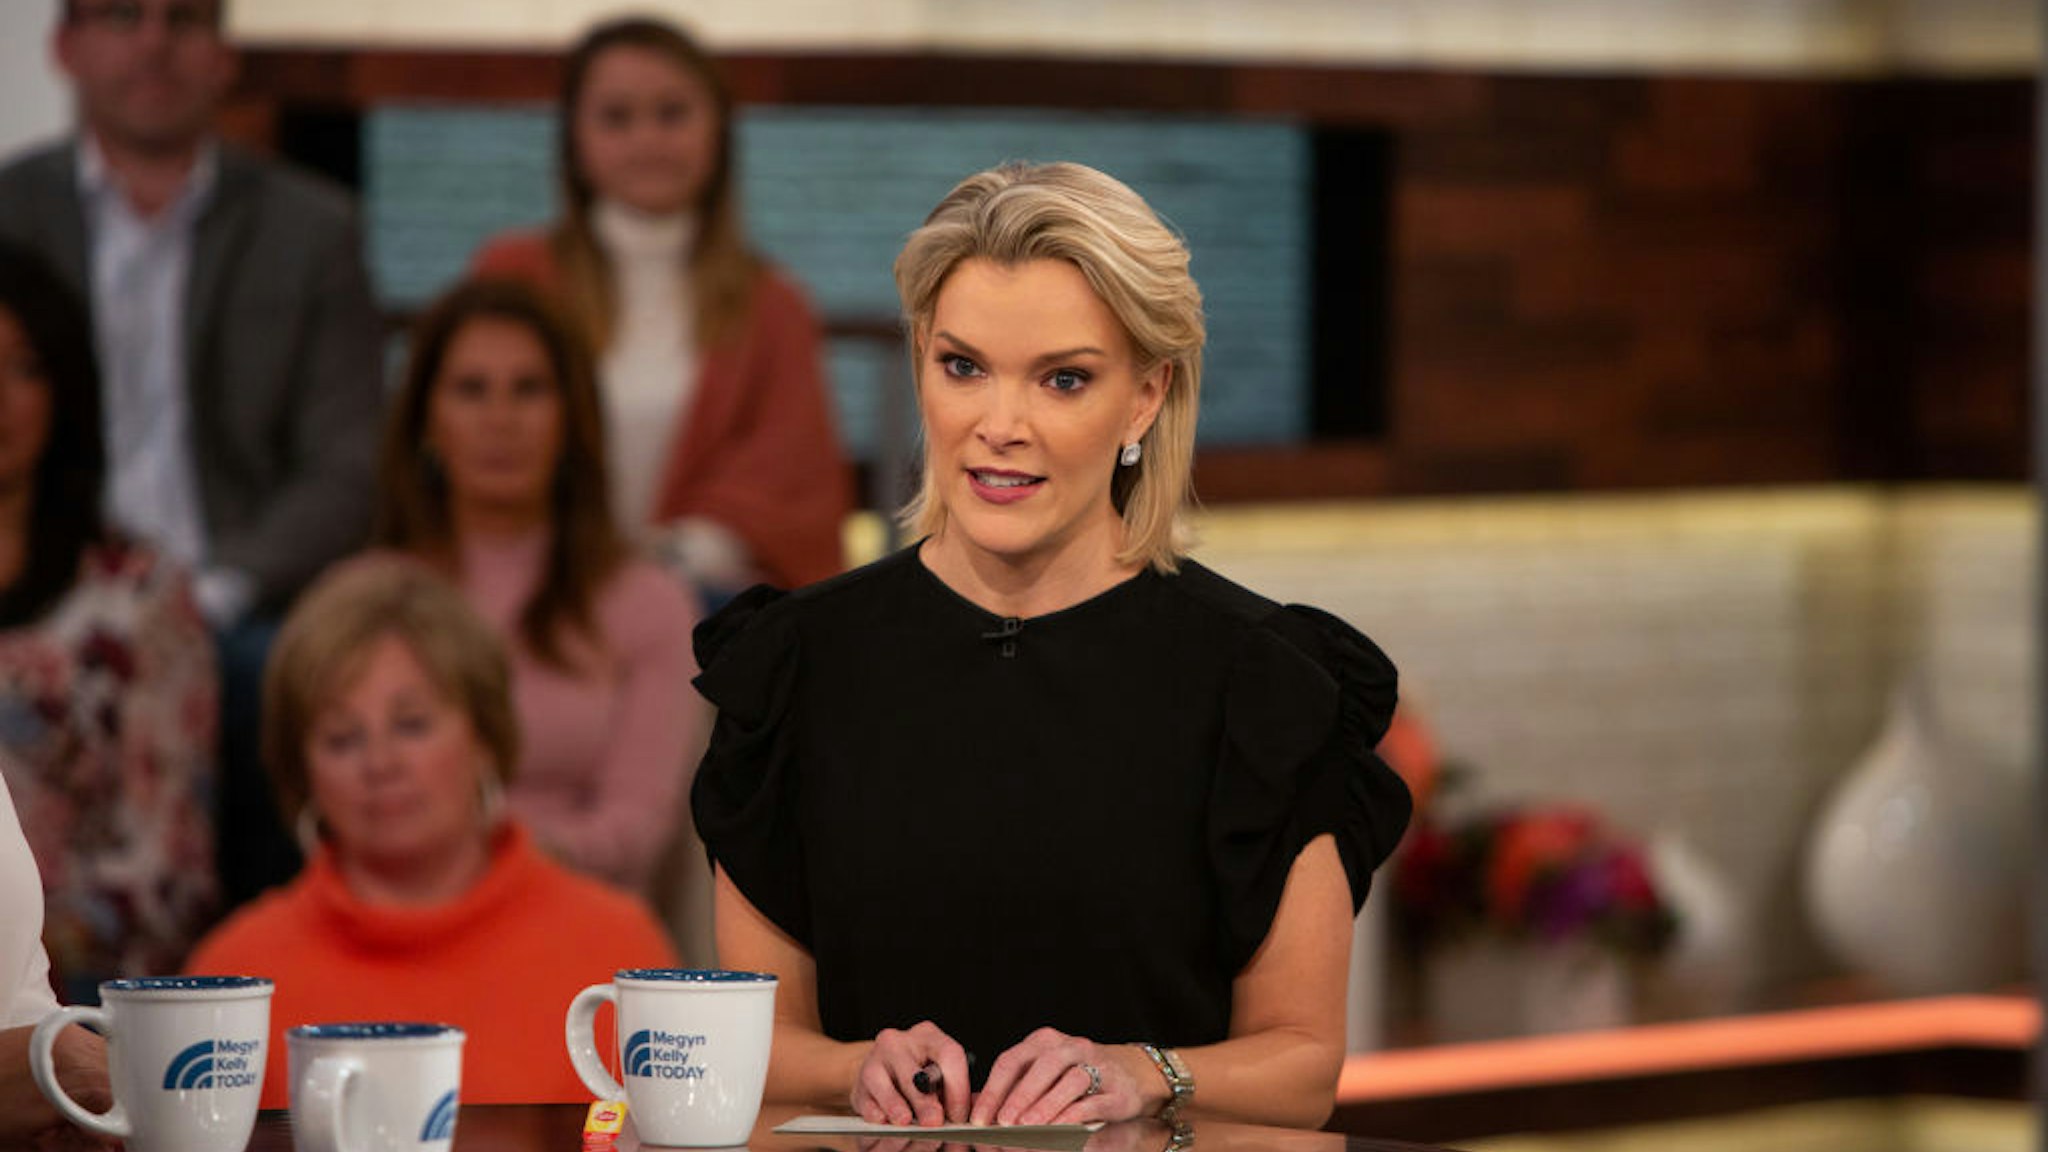 MEGYN KELLY TODAY -- Pictured: Megyn Kelly on Wednesday, October 24, 2018 -- (Photo by: Nathan Congleton/NBCU Photo Bank/NBCUniversal via Getty Images via Getty Images)